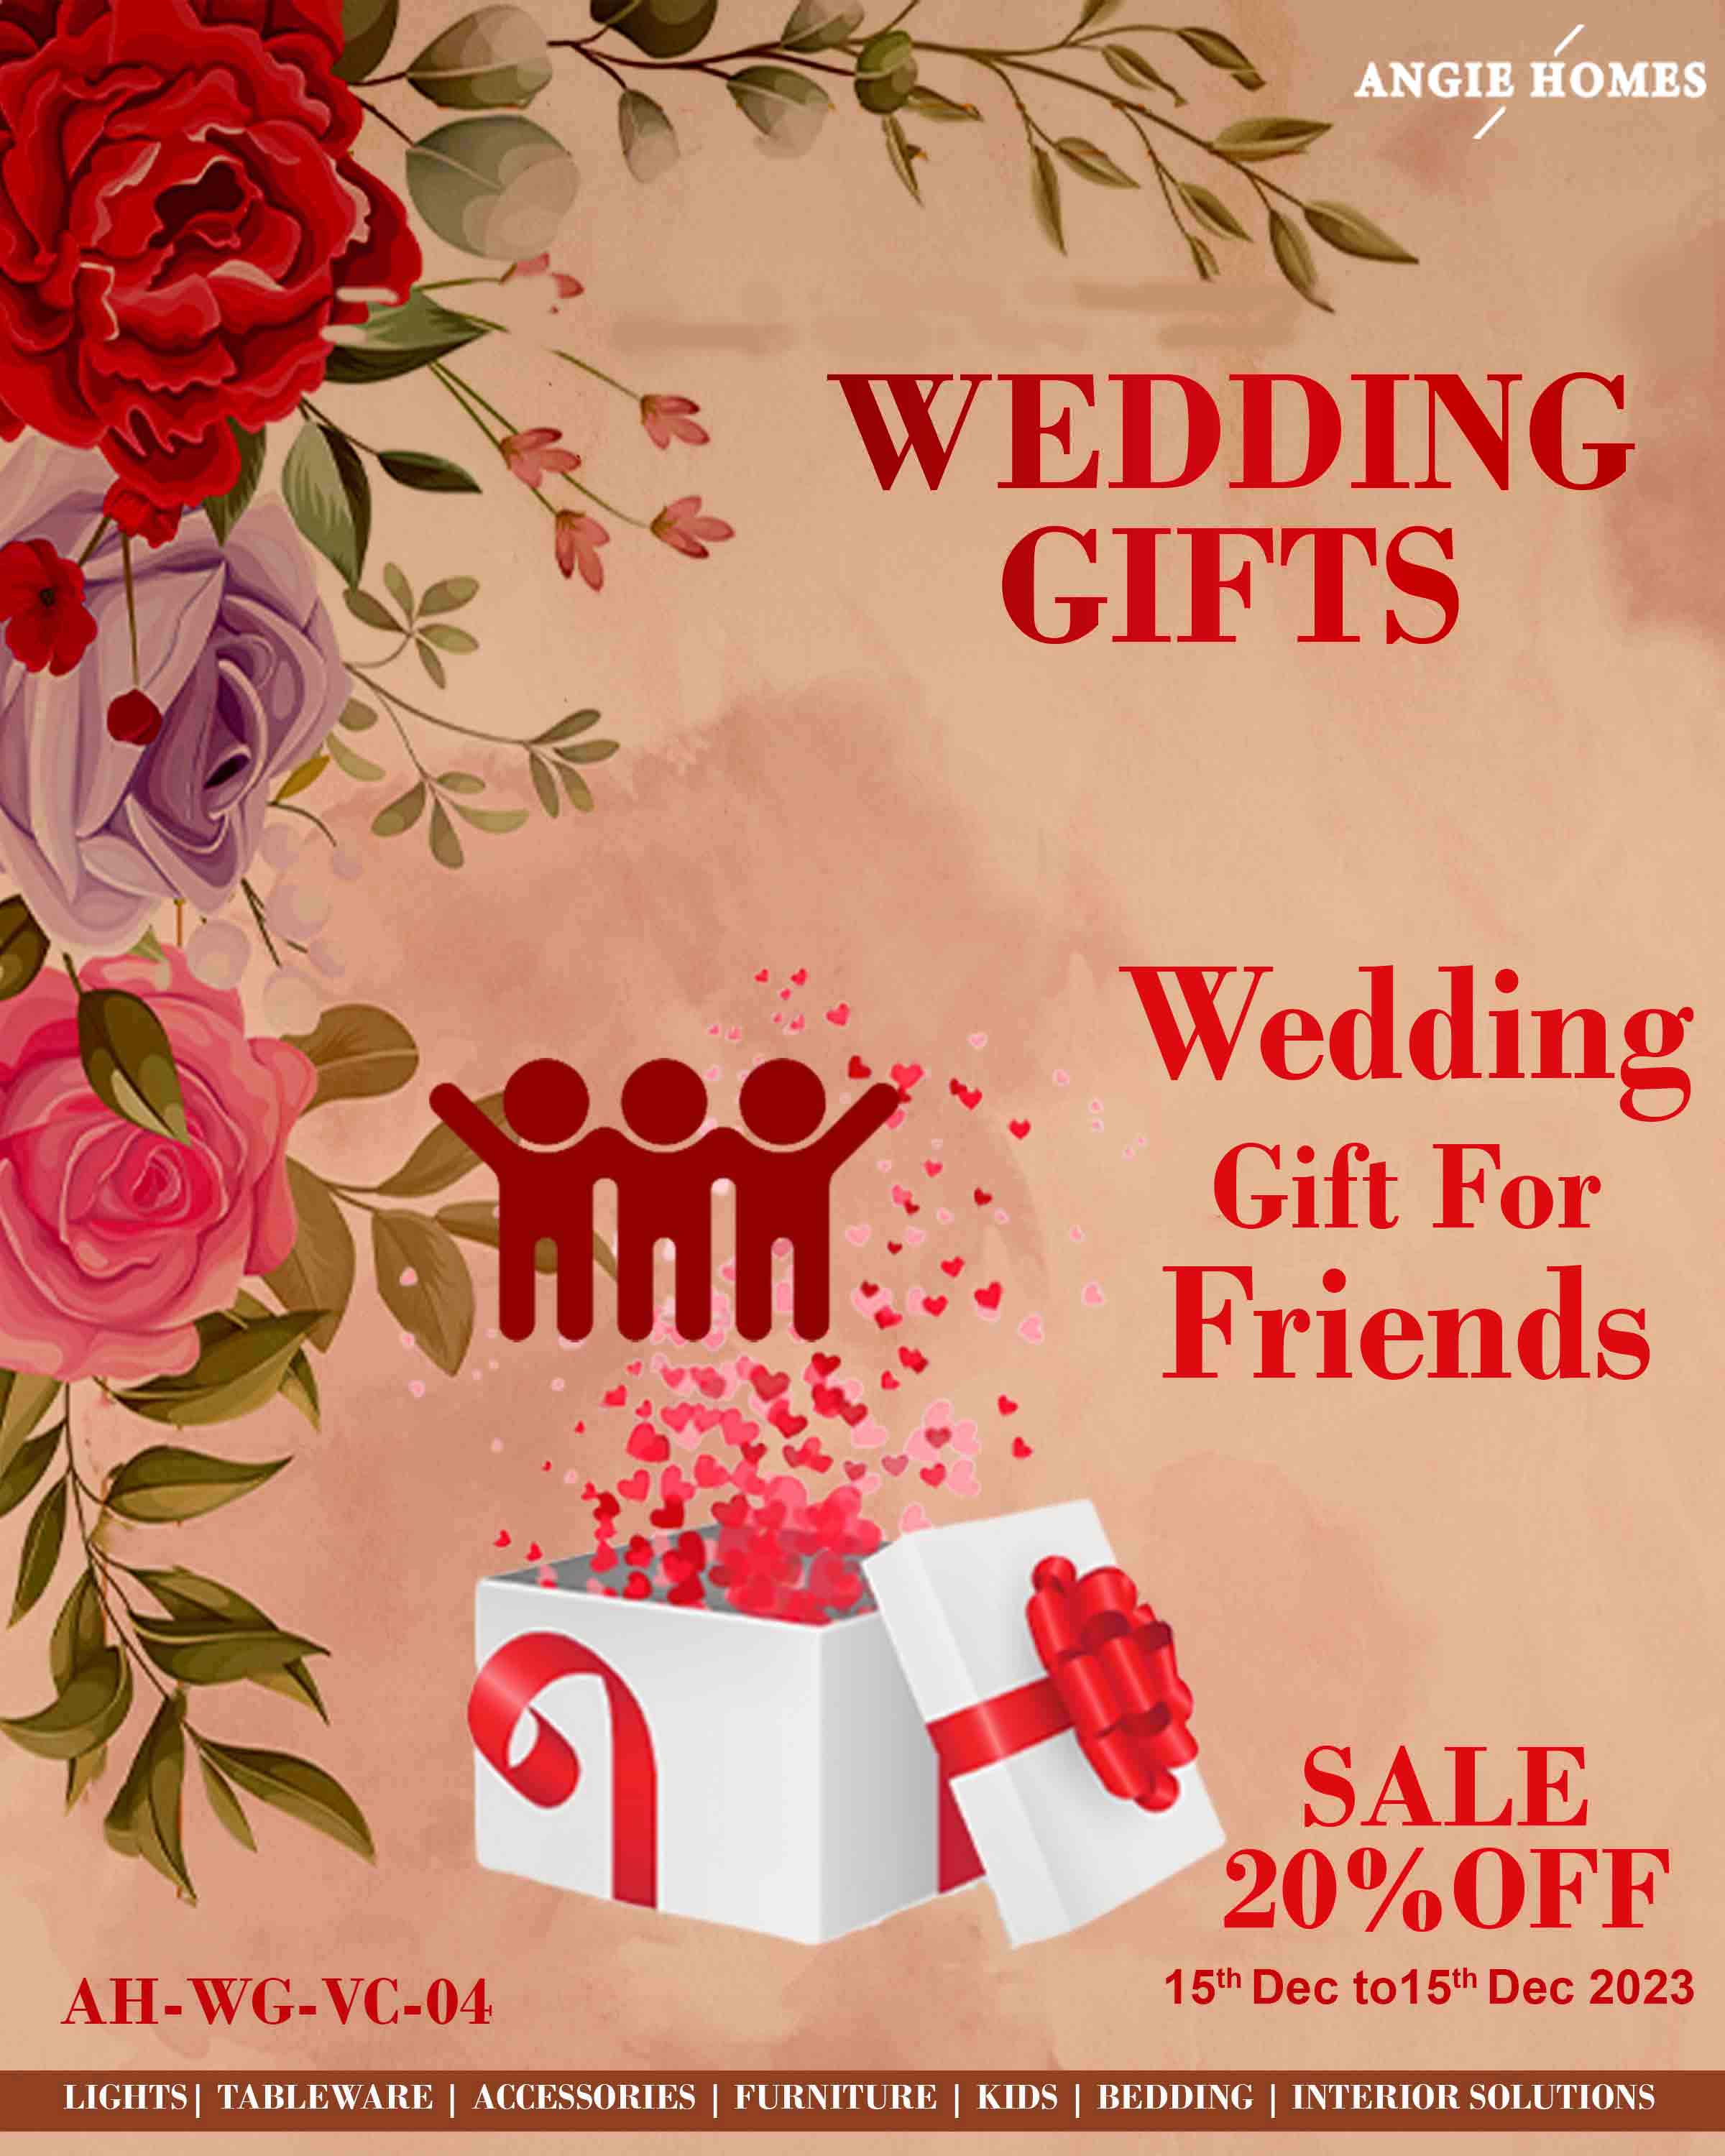 WEDDING GIFTS FOR FRIENDS | MARRIAGE GIFT VOUCHER | RETURN GIFTTING CARD ANGIE HOMES